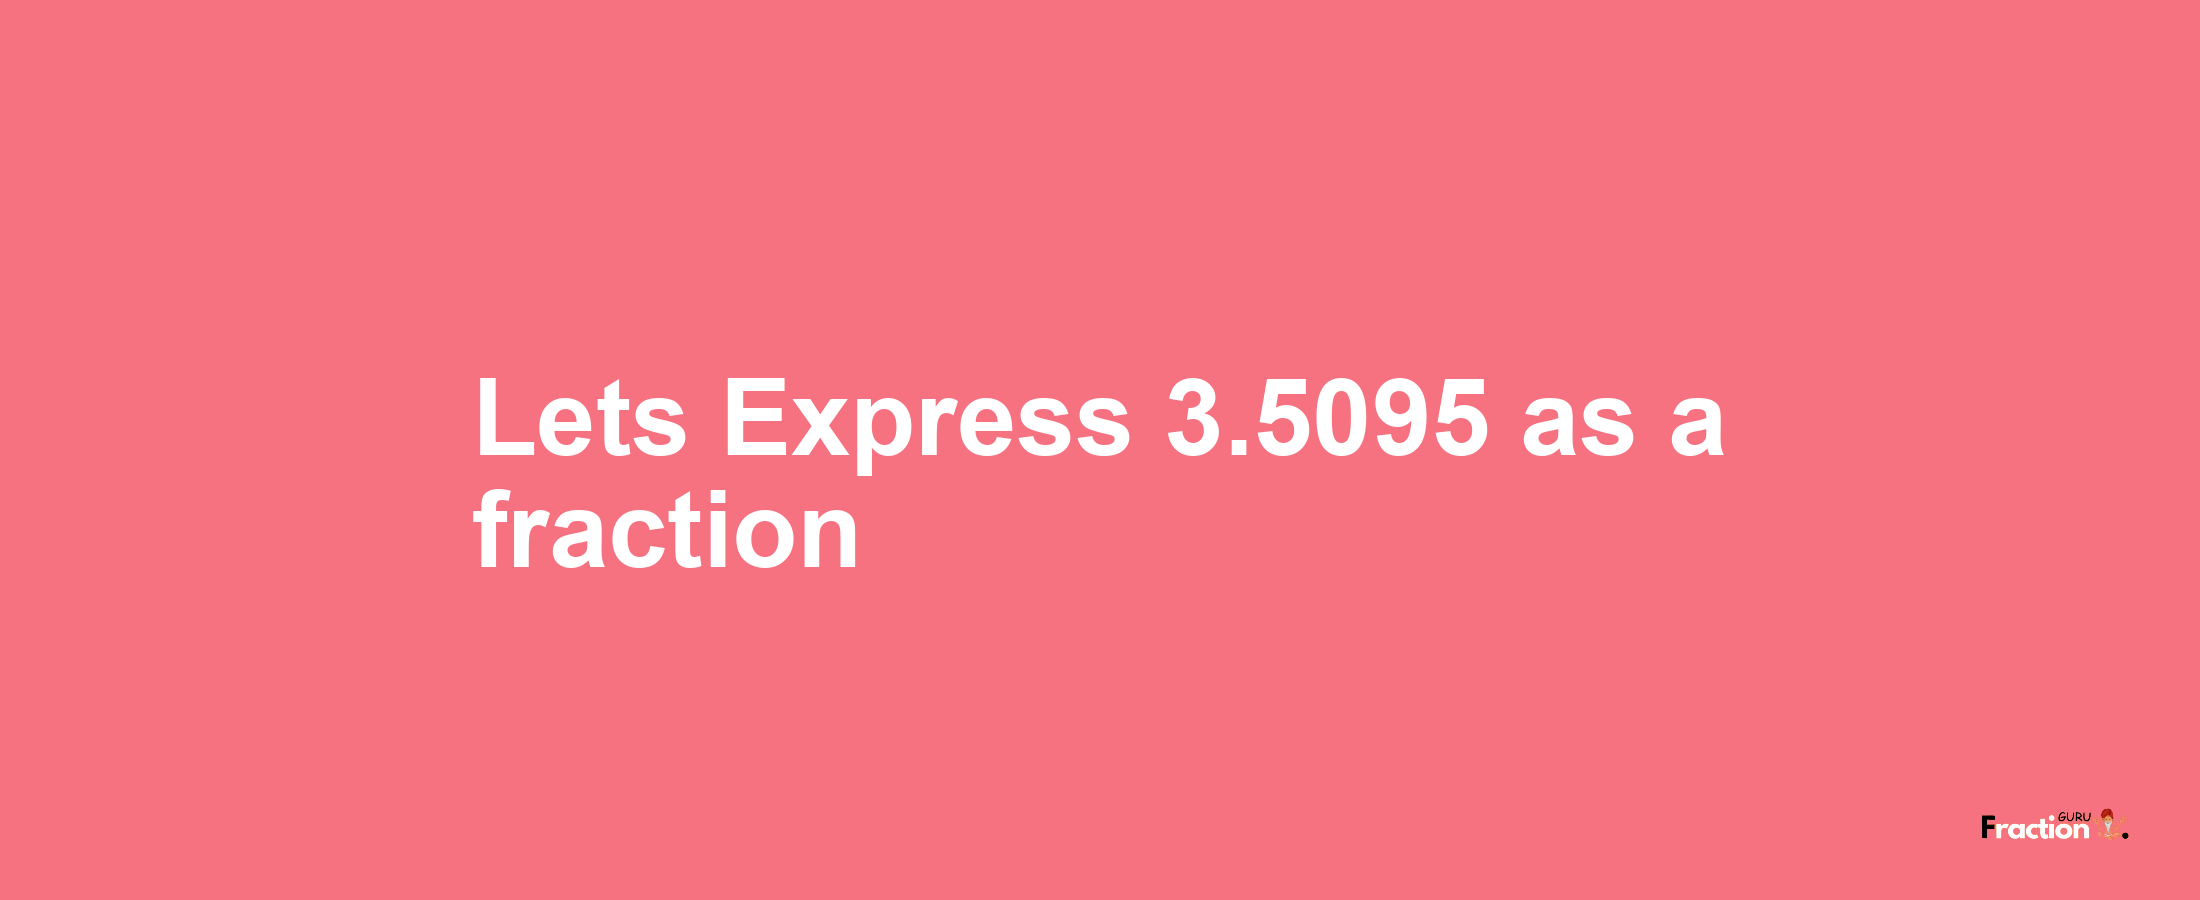 Lets Express 3.5095 as afraction